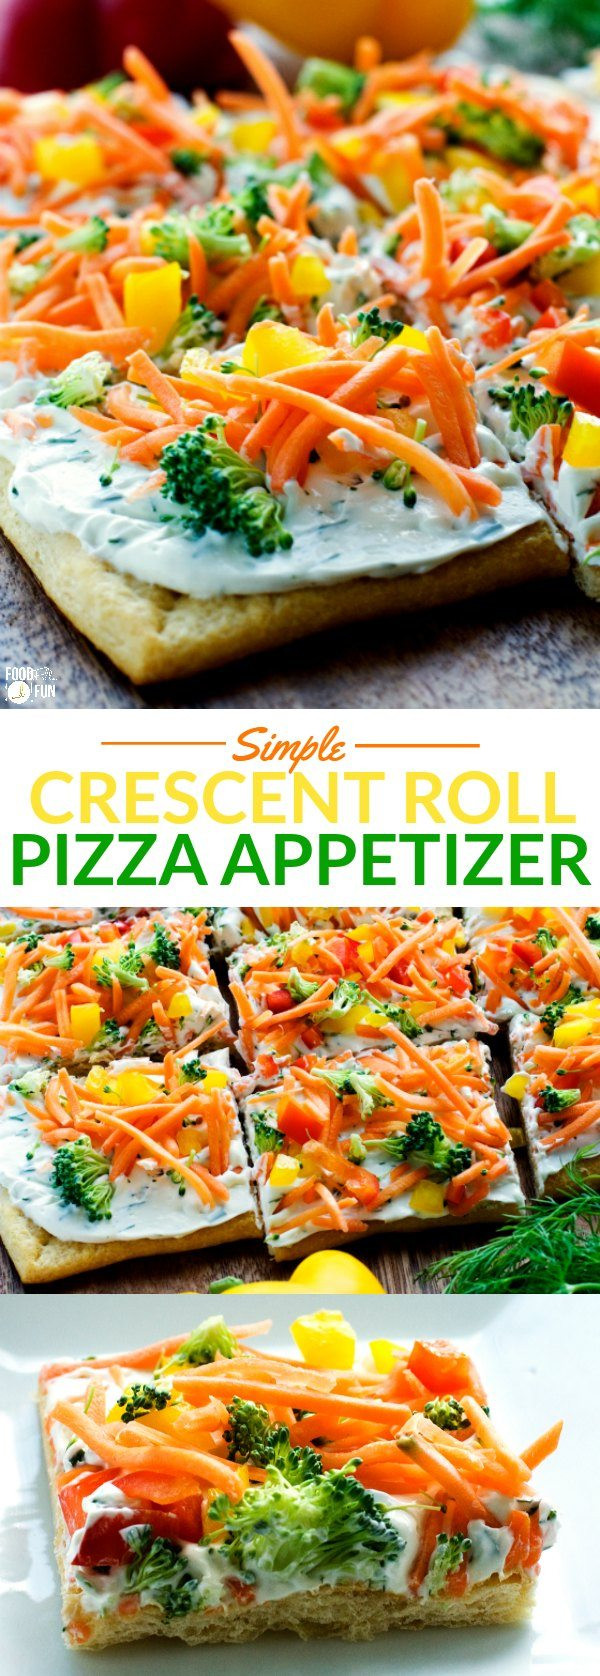 Appetizers Made With Crescent Rolls
 Simple Crescent Roll Pizza Appetizer • Food Folks and Fun